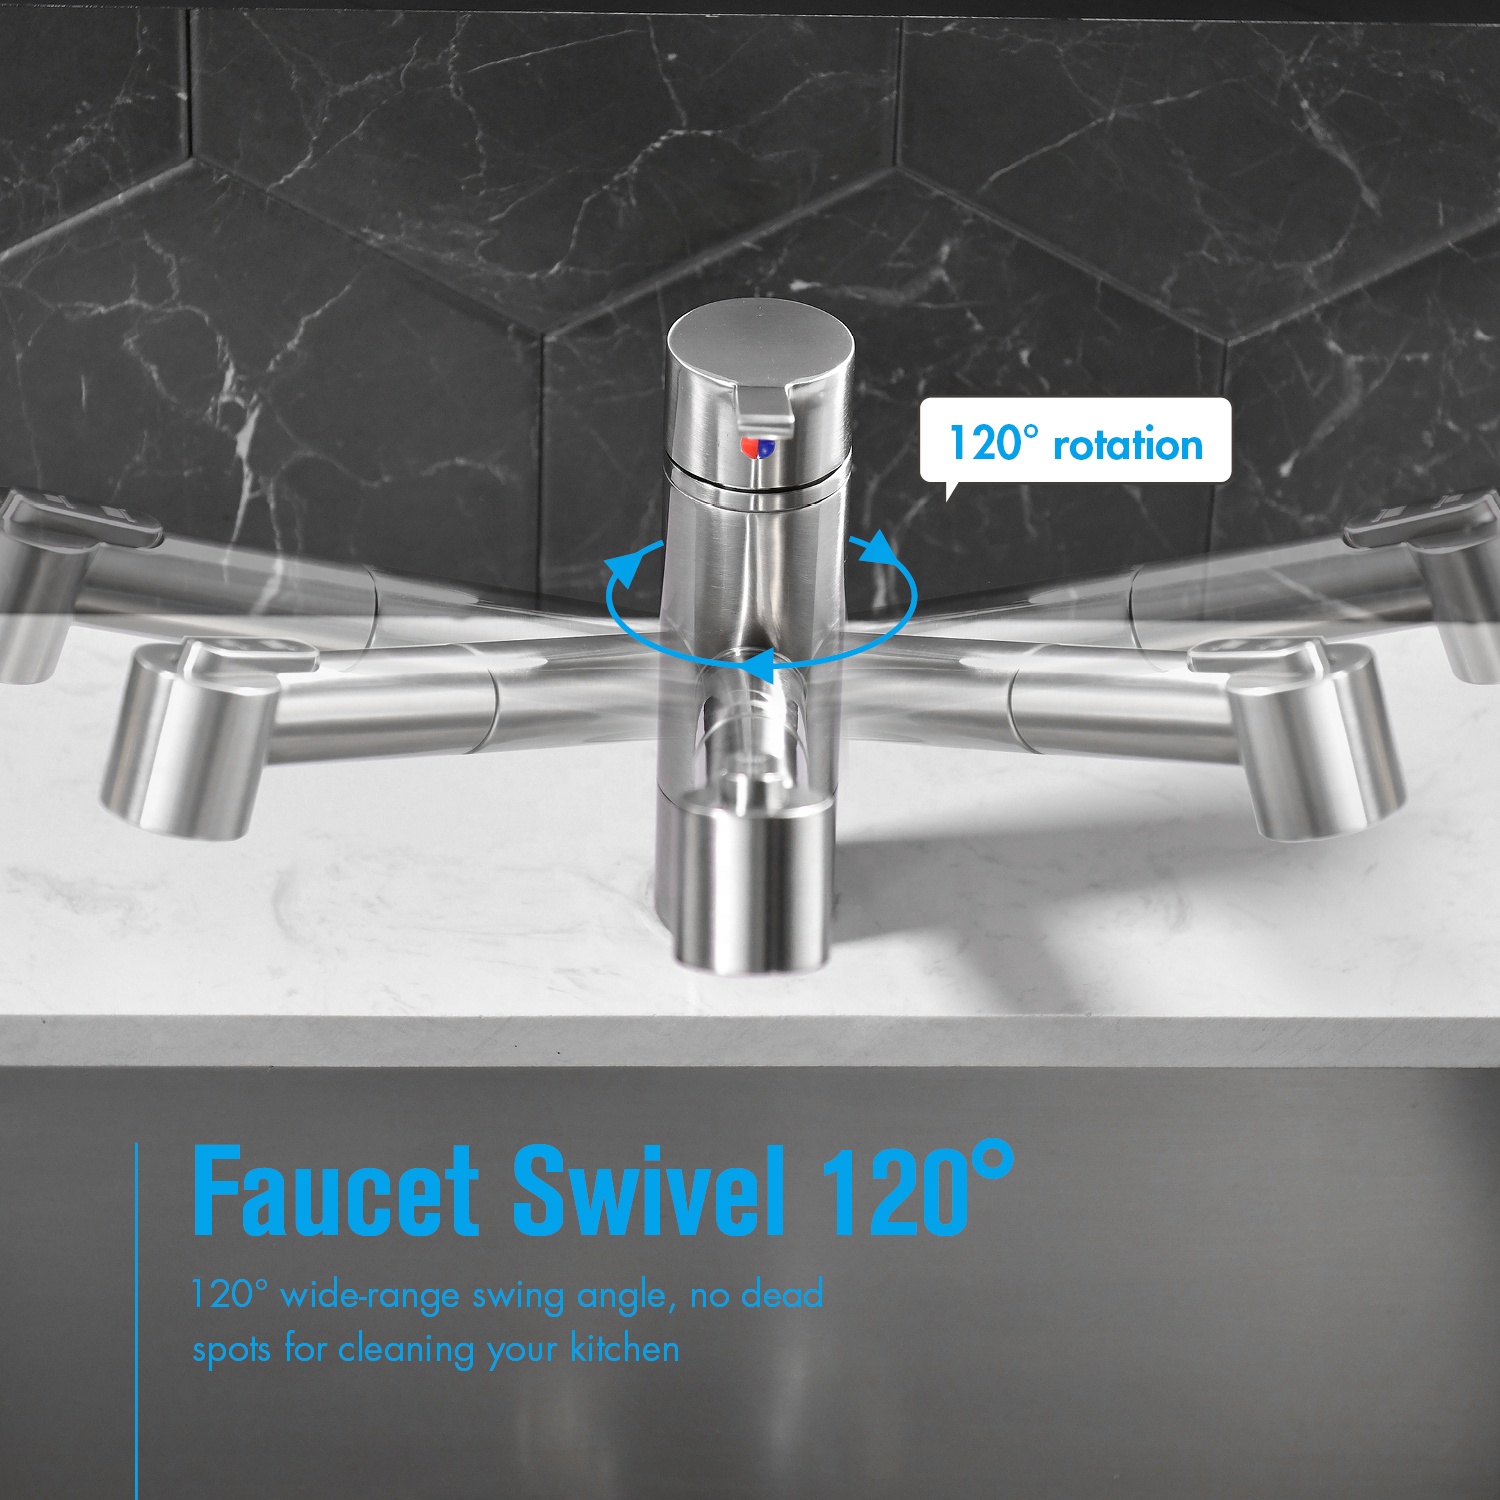 Pull Out Faucet Stainless Steel Kitchen Faucet Brushed Wall Mounted Kitchen Faucet Zinc Alloy